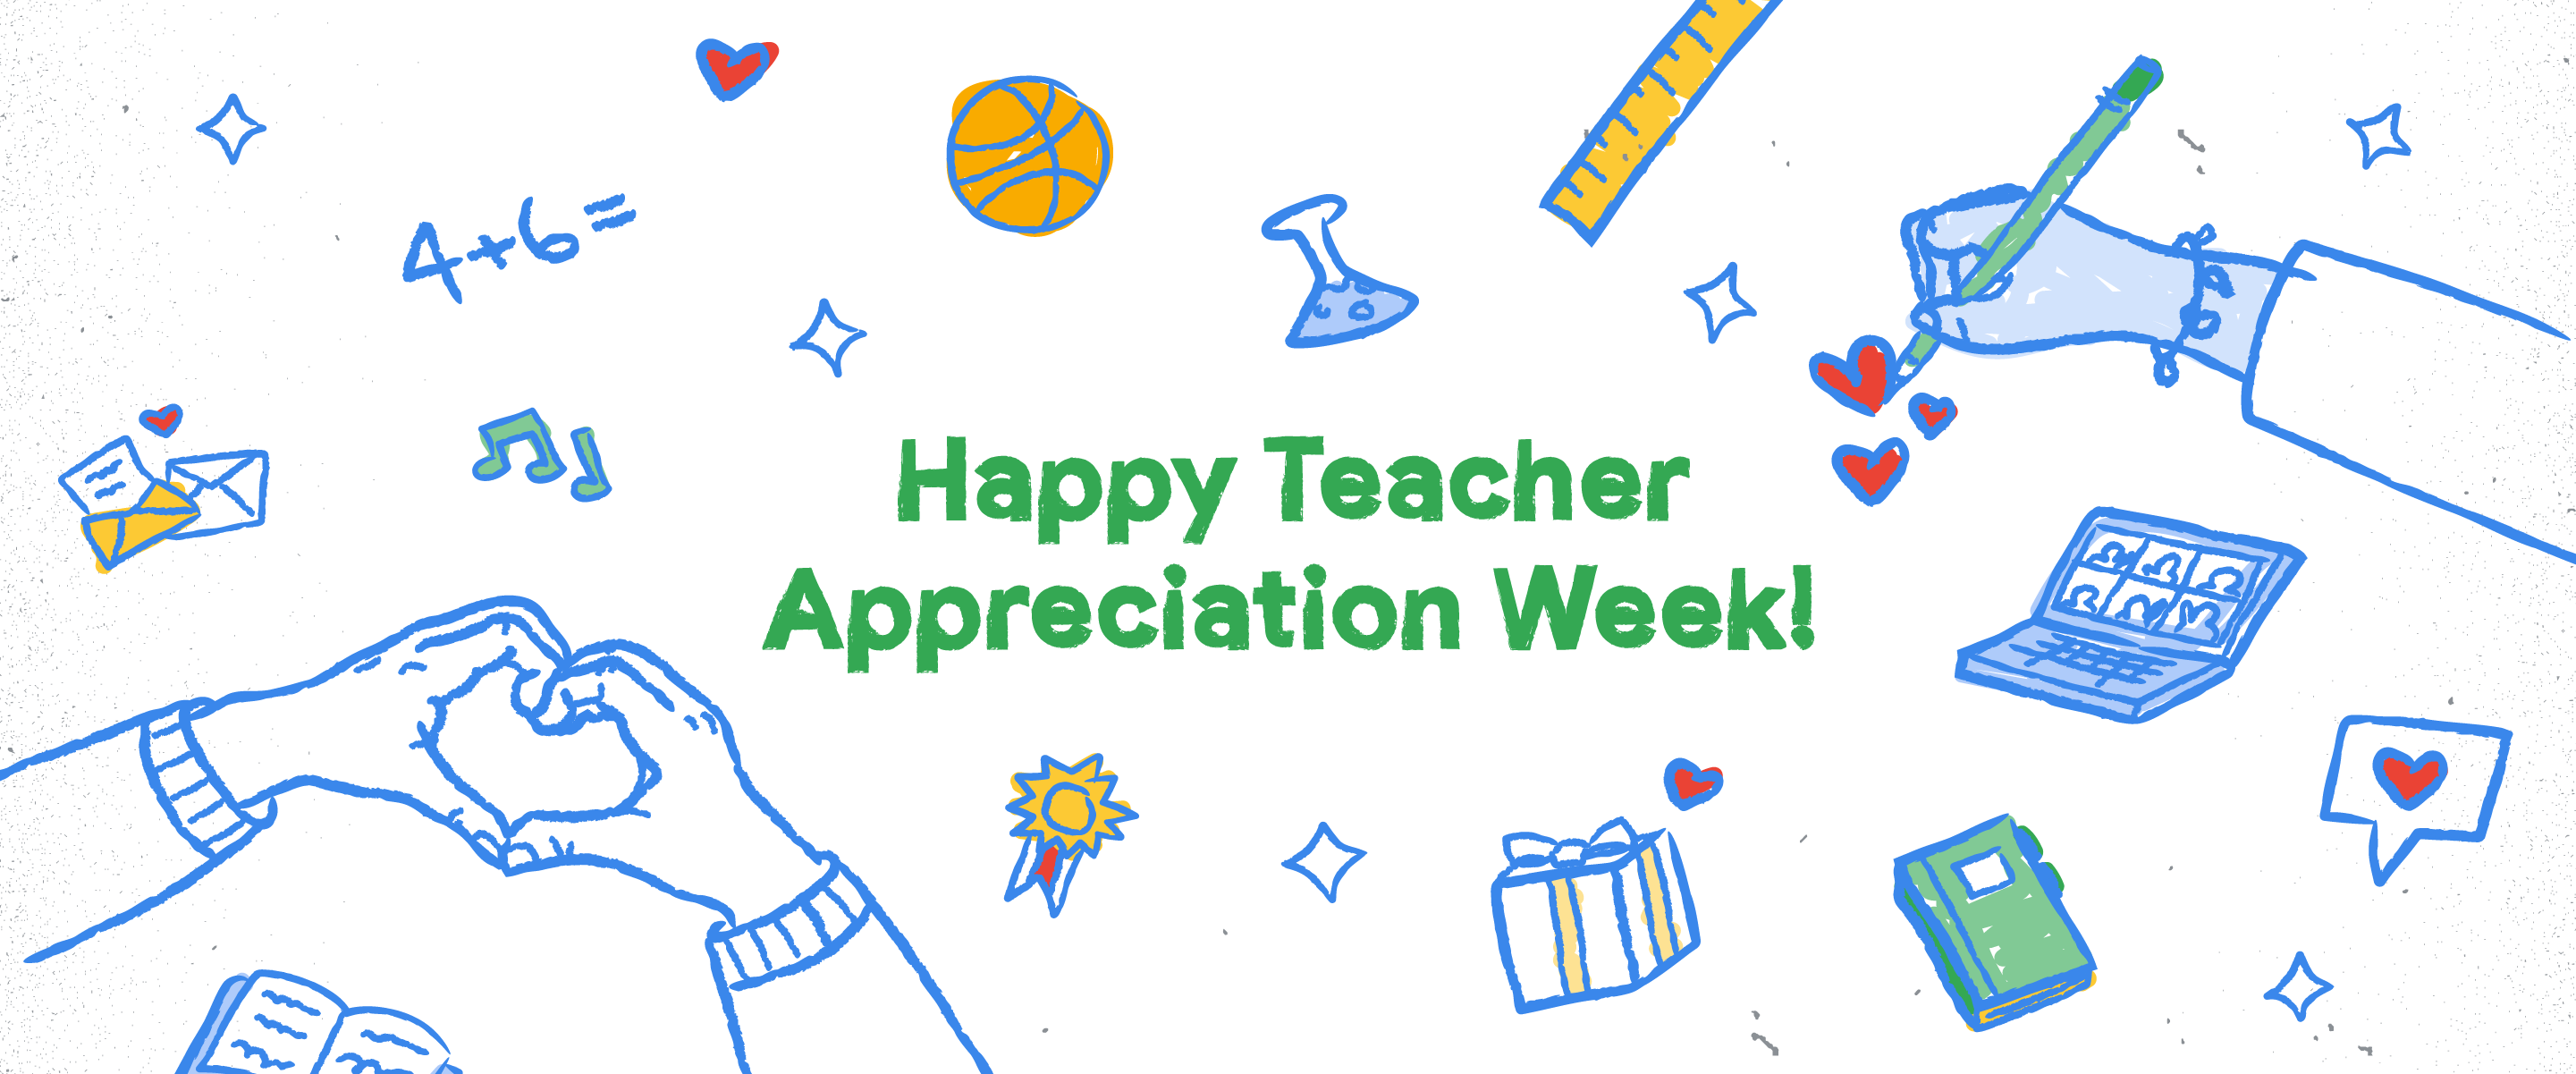 What Date Is Teacher Appreciation Day